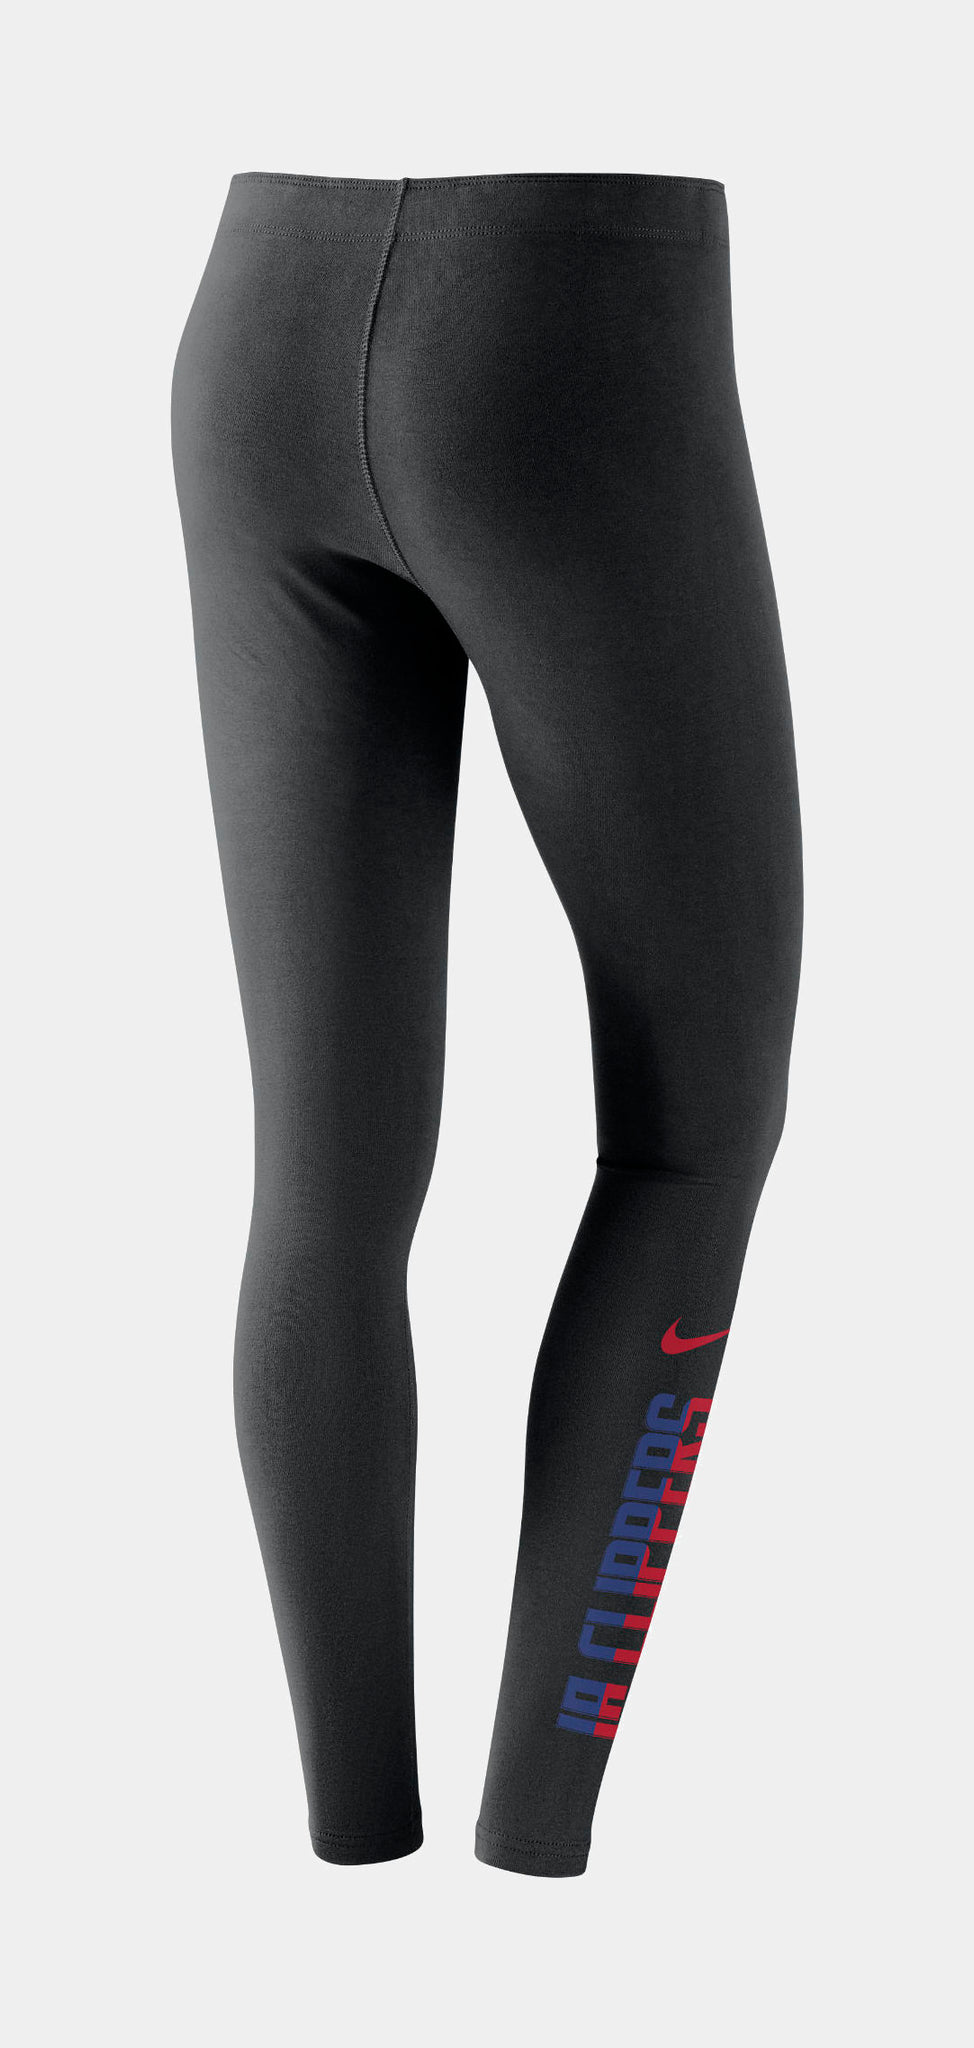 Nike Los Angeles Clippers NBA Womens Tights Black 862538-010 – Shoe Palace